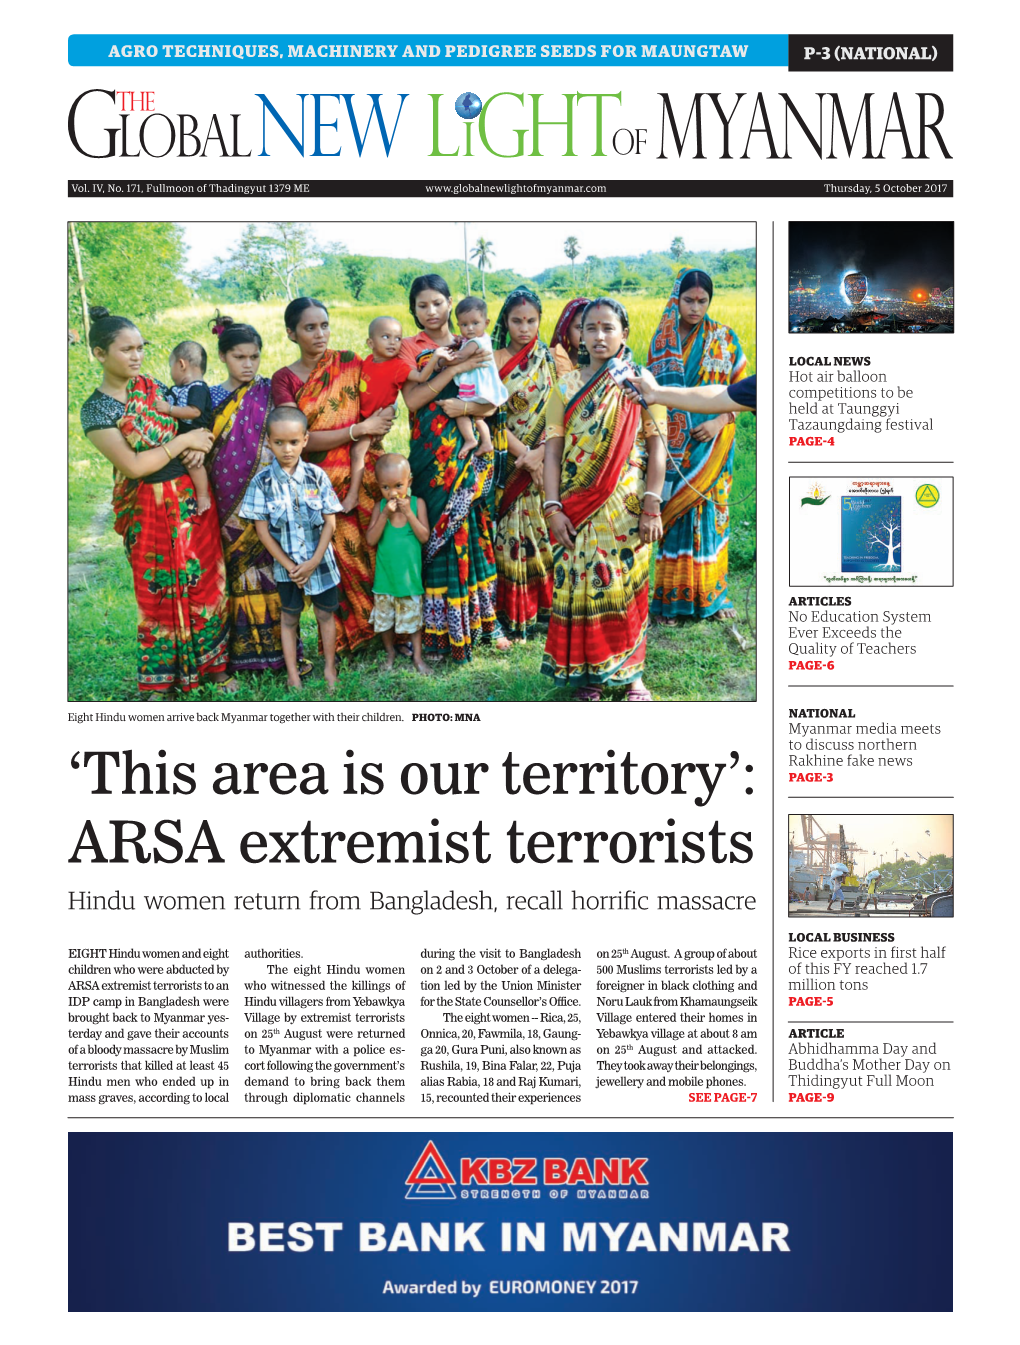 'This Area Is Our Territory': ARSA Extremist Terrorists